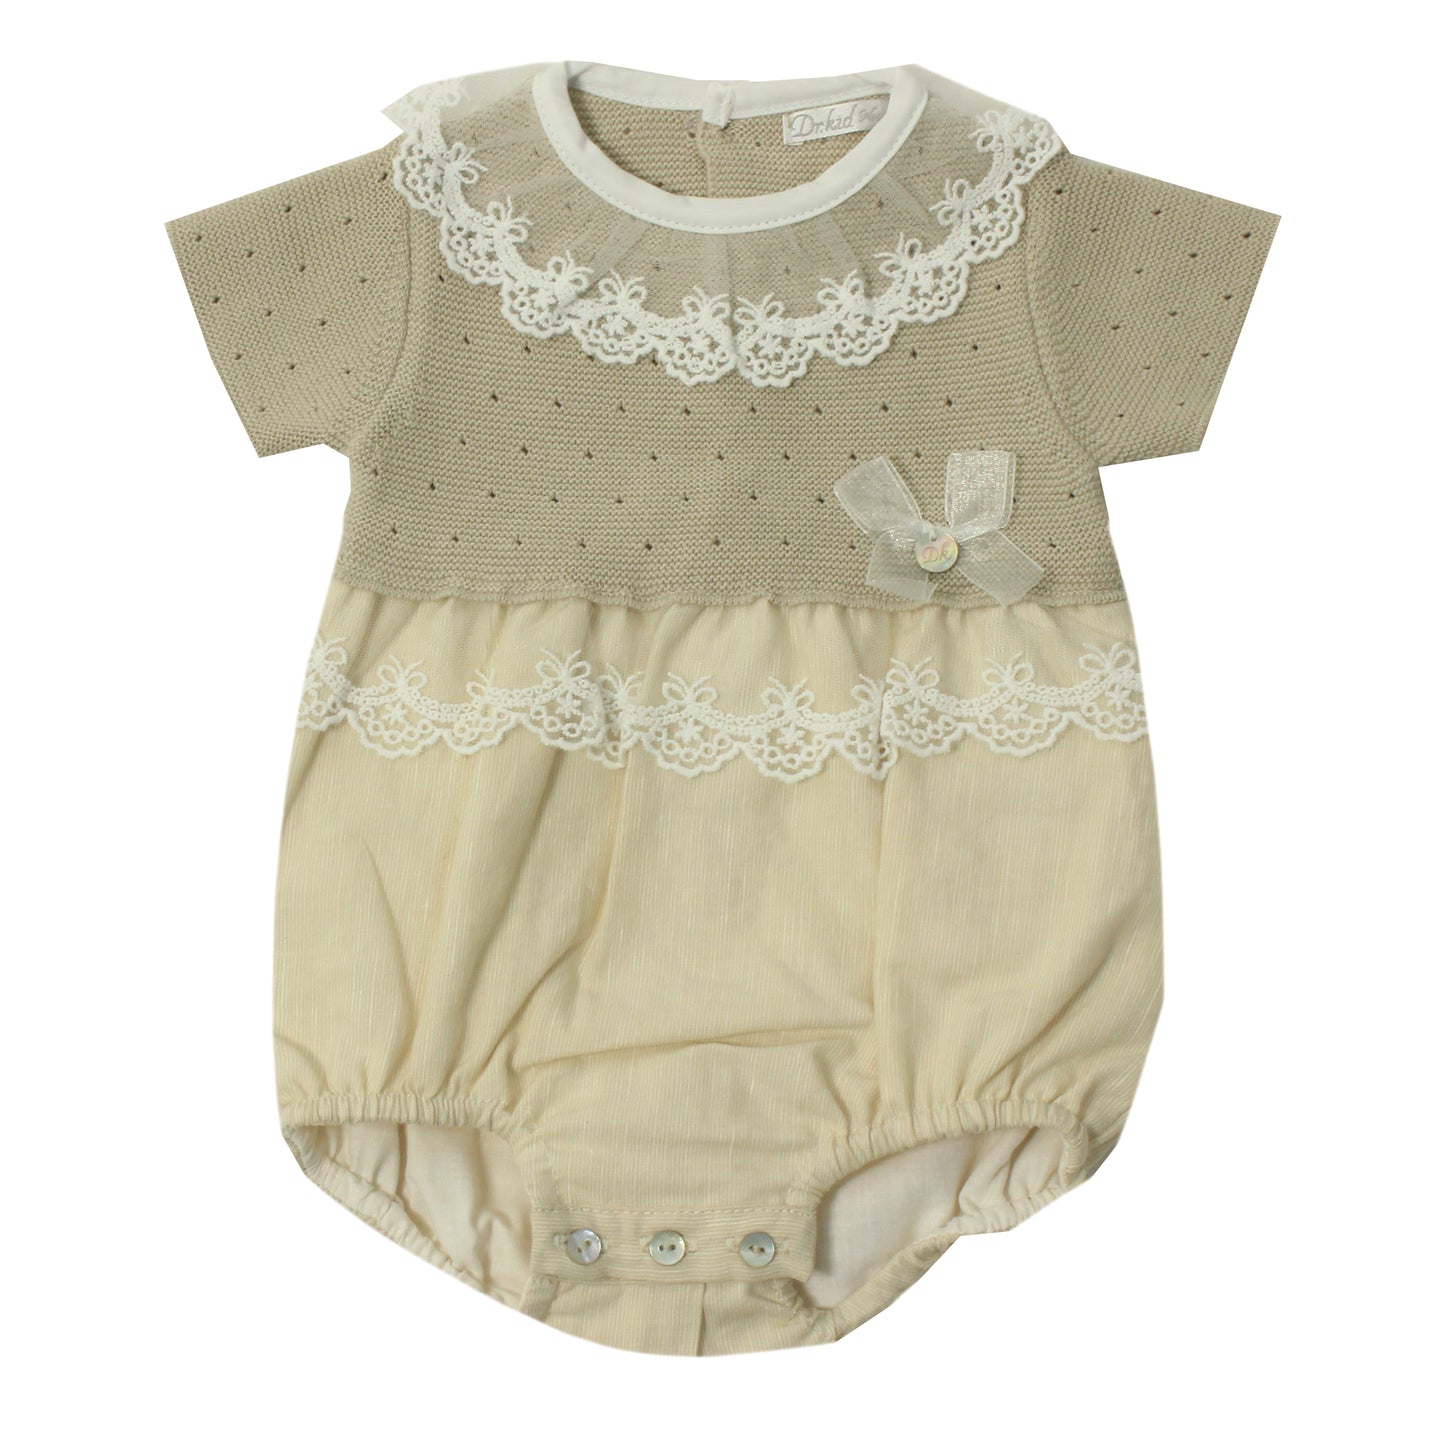 Dr Kid beige and cream lace romper for baby girls - Adora Childrenswear 